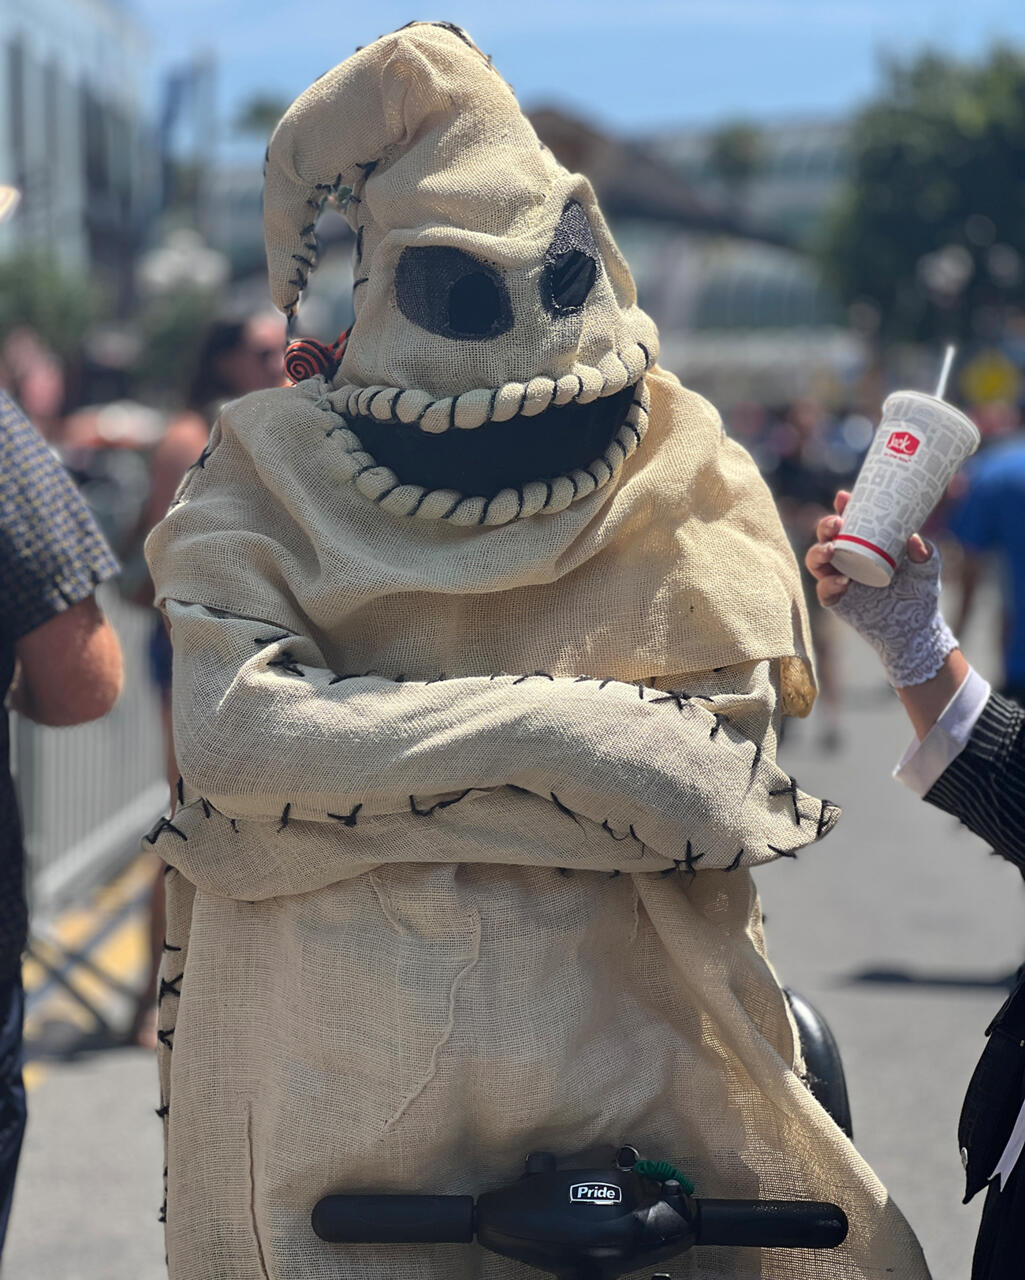 Oogie Boogie from The Nightmare Before Christmas